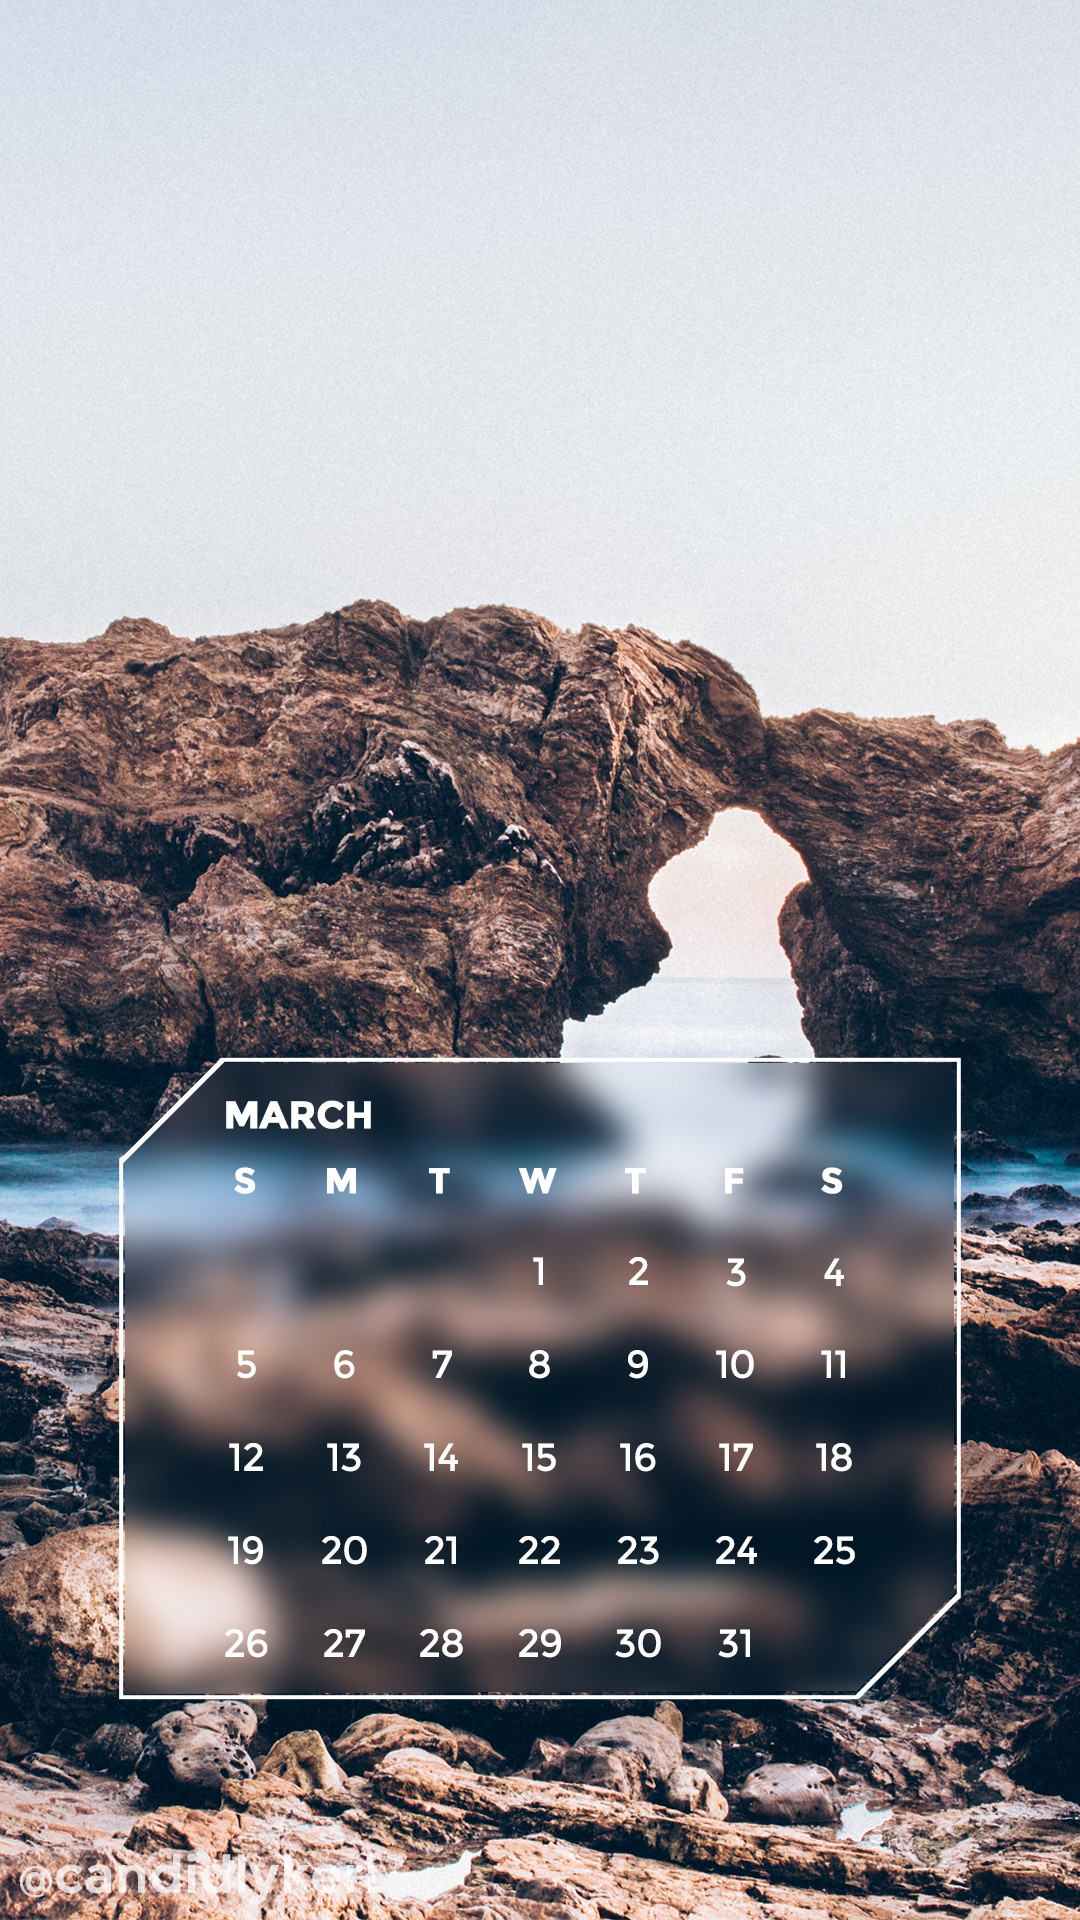 1080x1920 Ocean Cliff, warm geo shape March calendar 2017 wallpaper you can download  for free on